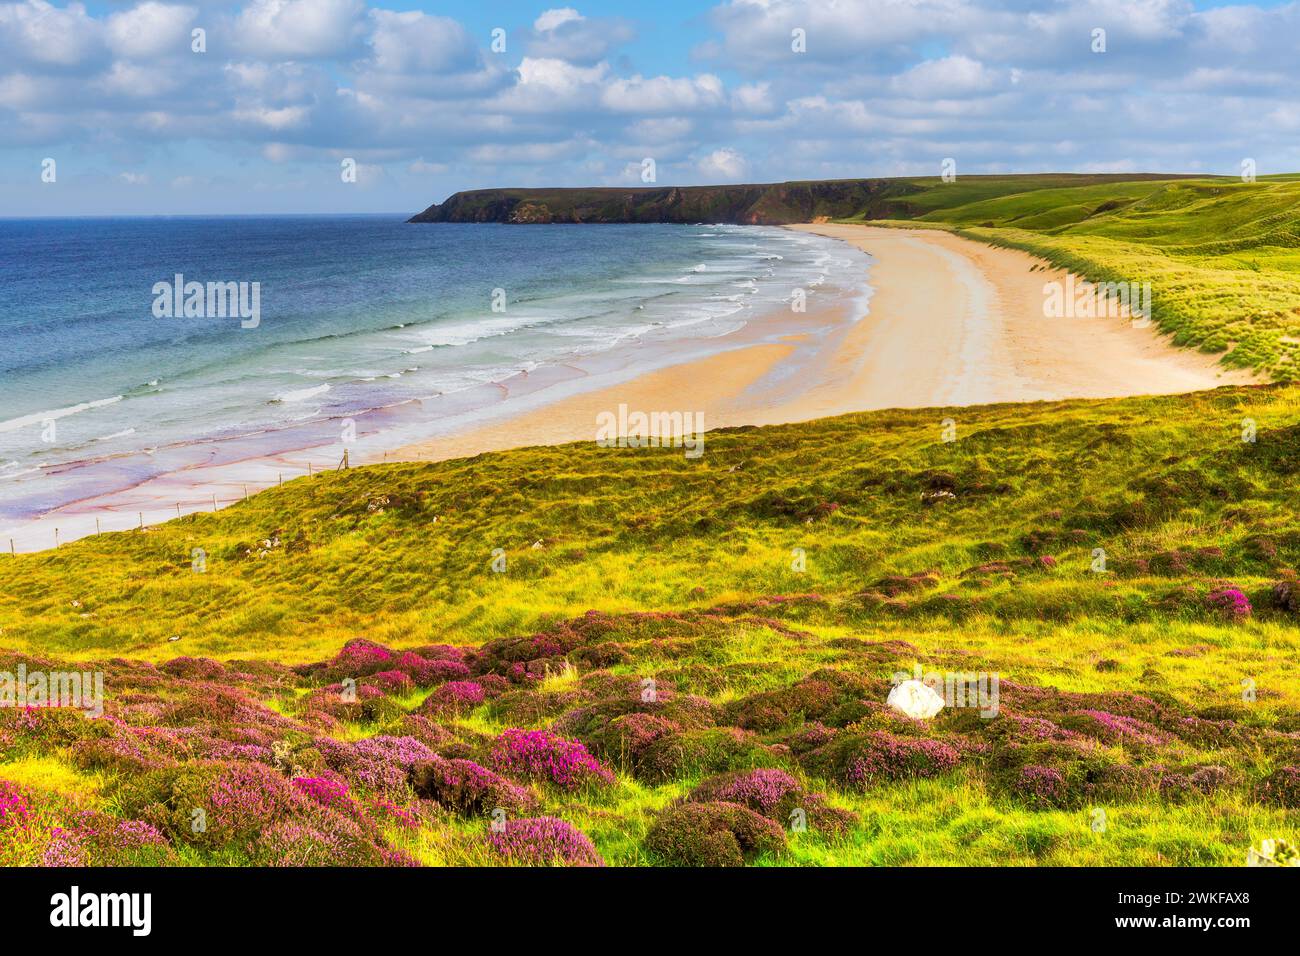 High view point of beach Traigh Mhor, North Tolsta, Isle of Lewis, Outer Hebrides, Scotland Stock Photo